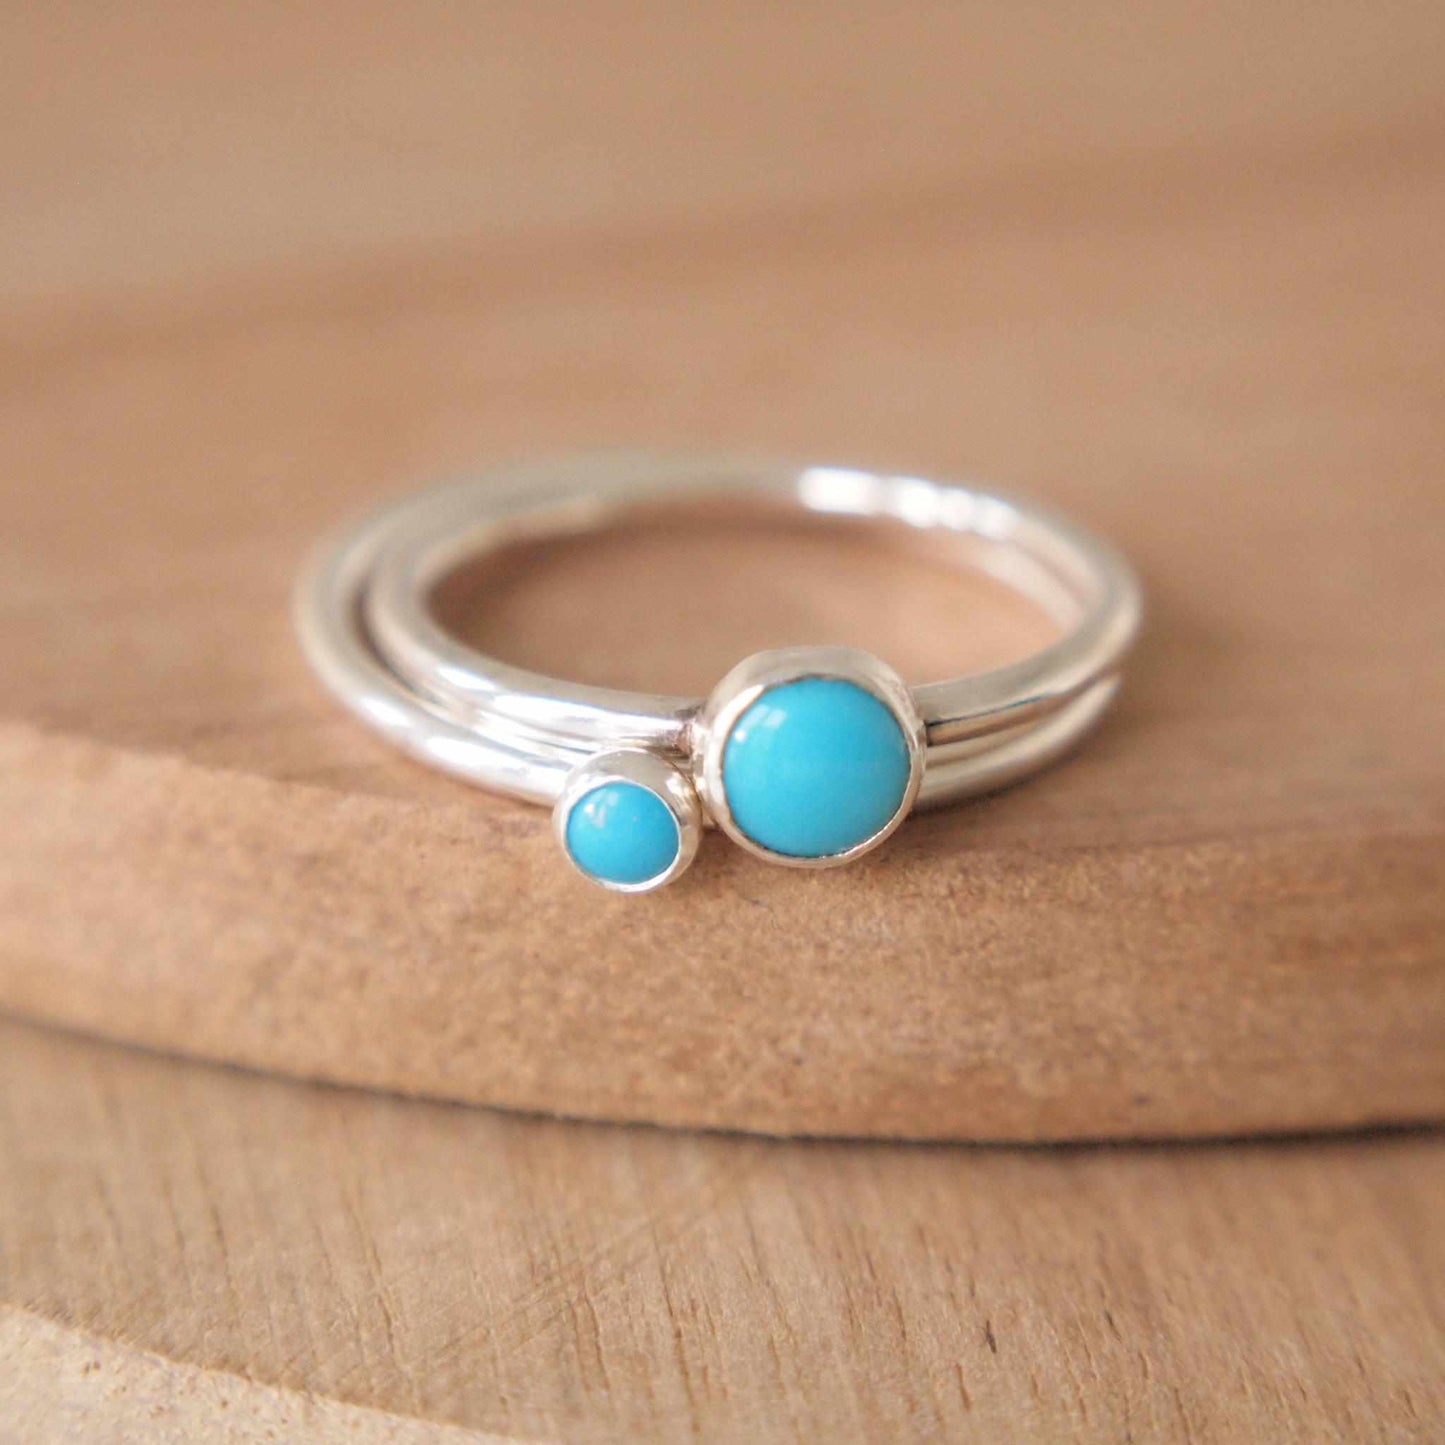 Turquoise double ring set in Sterling Silver. Handmade in Scotland by maram jewellery